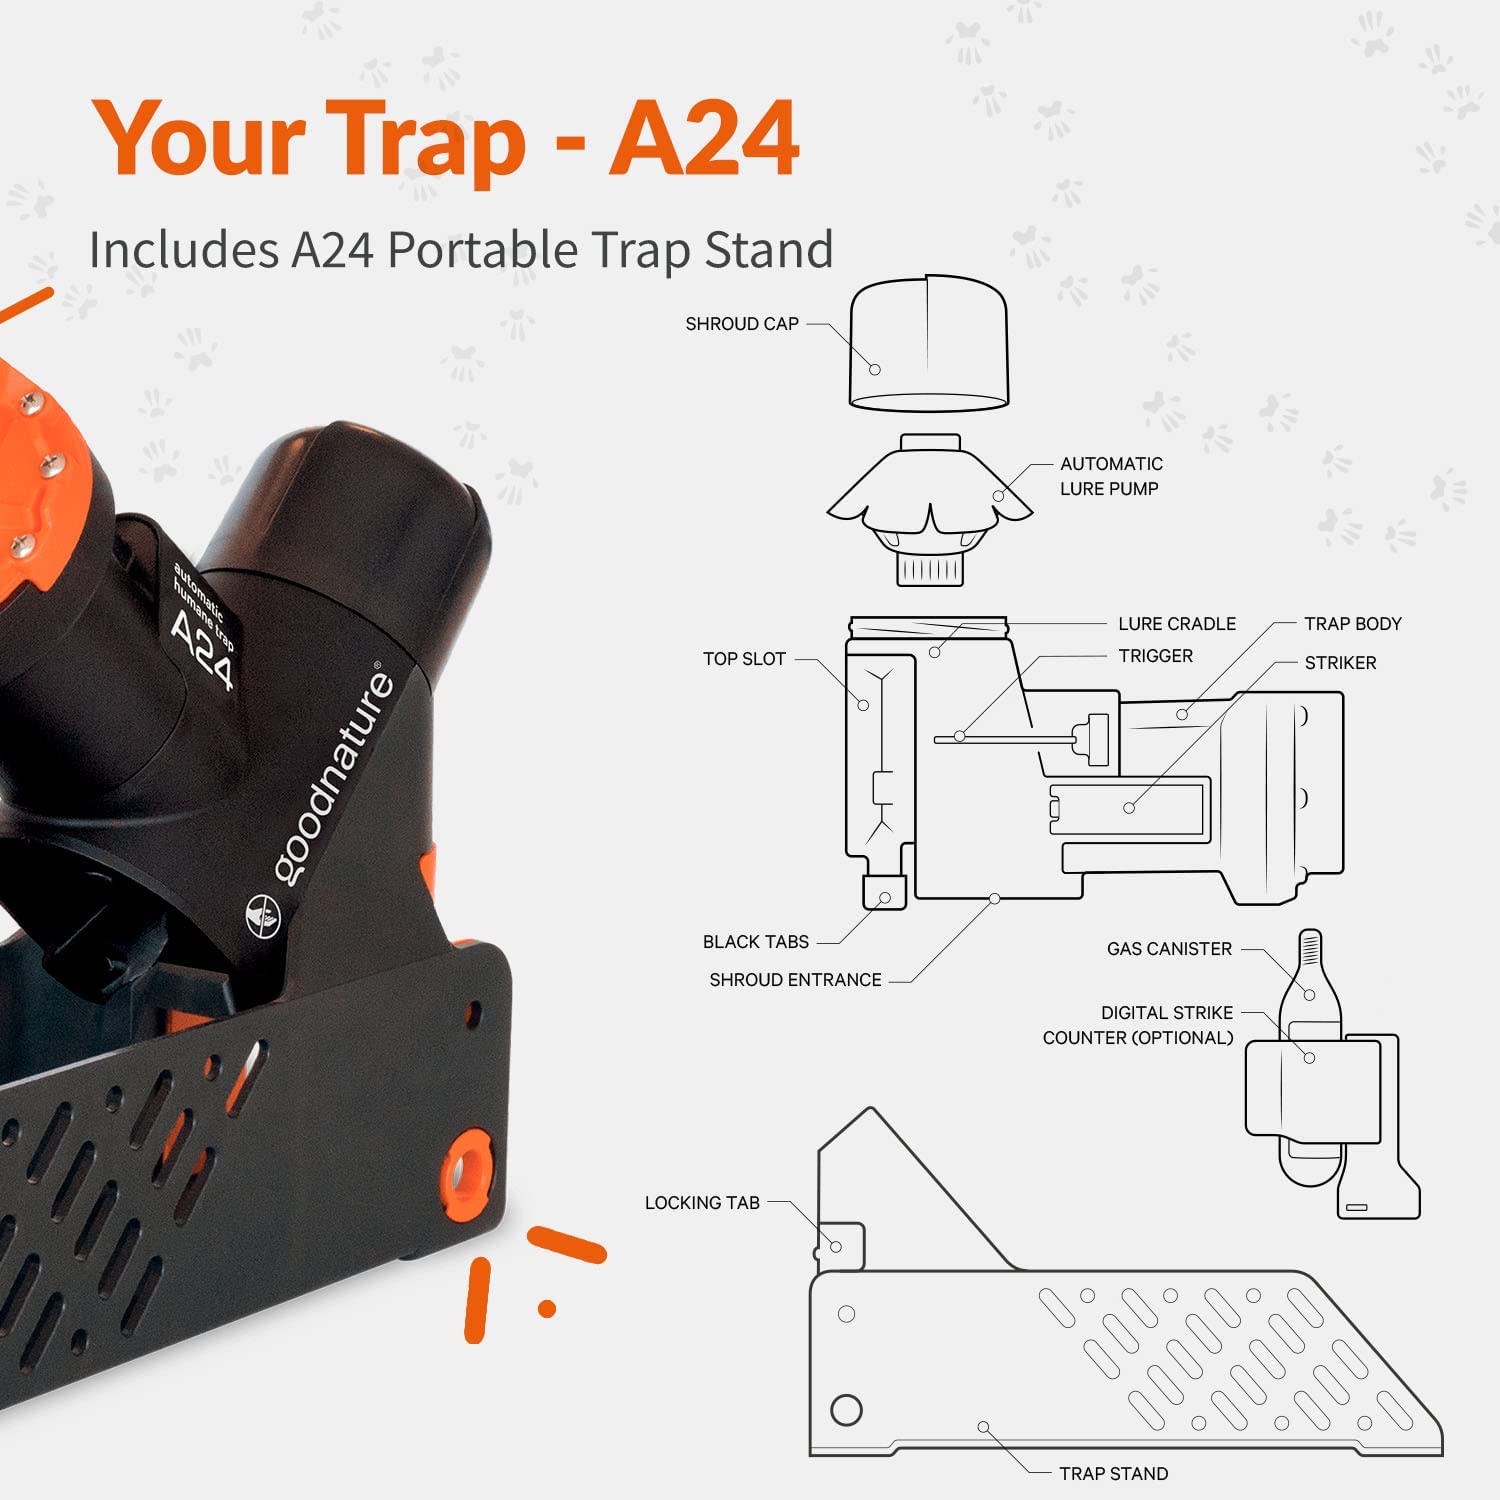 A24 Trap CO2 Canister, Wildlife Control Supplies